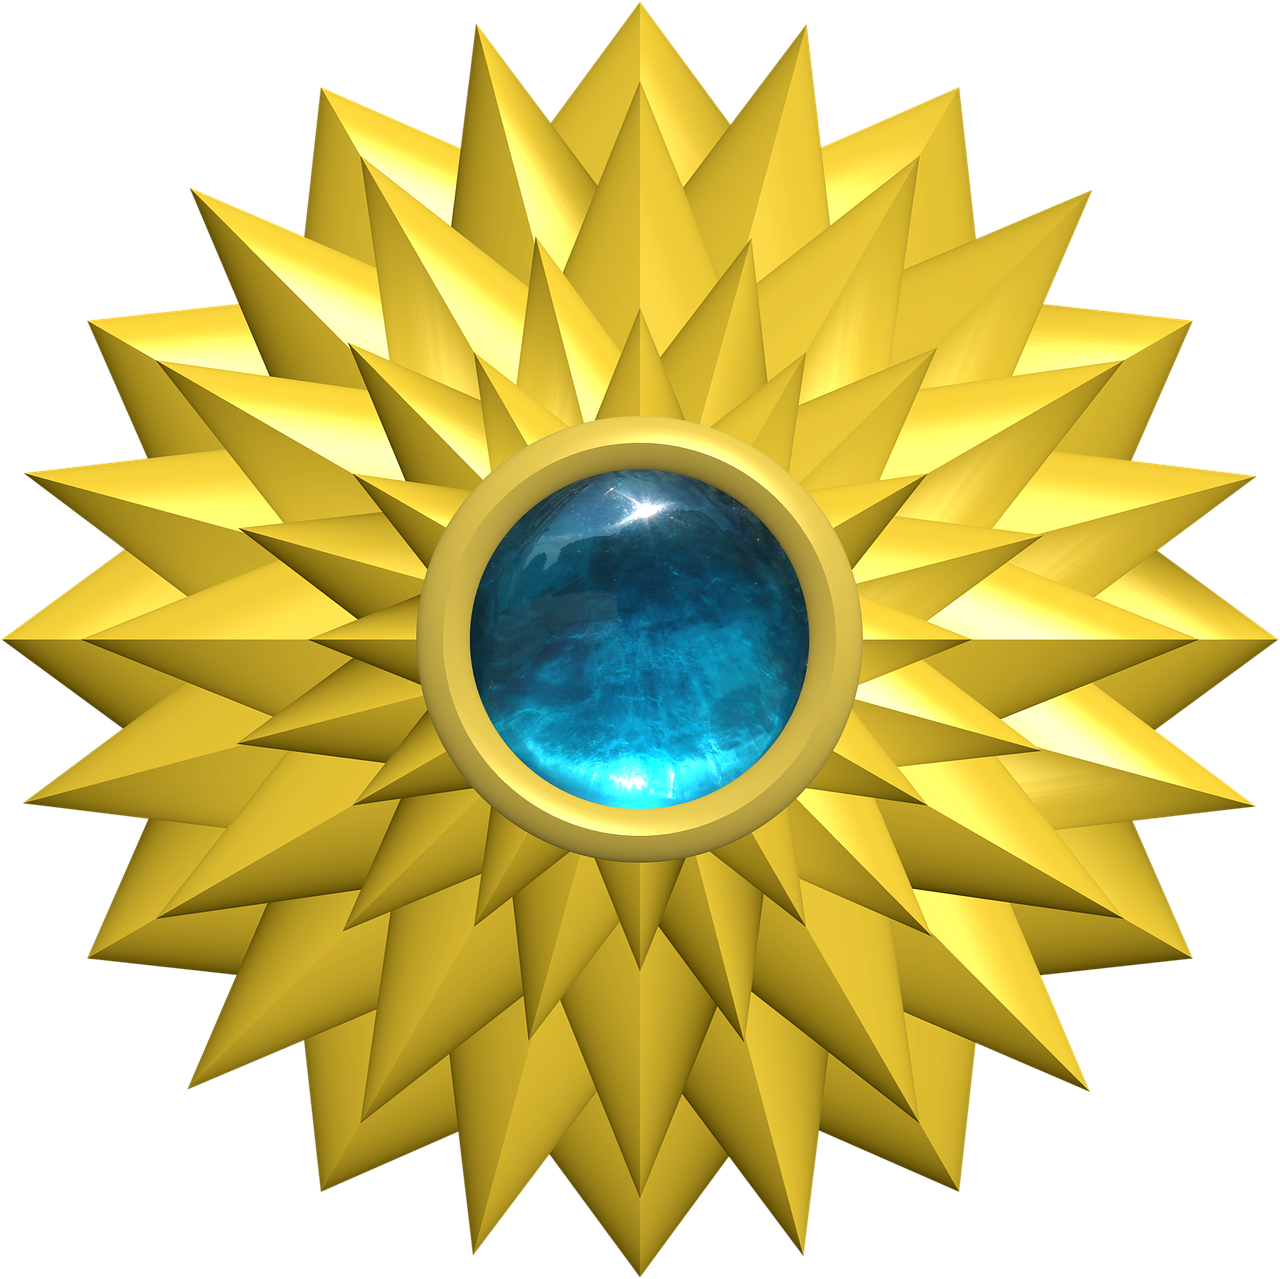 a close up of a sunflower on a black background, a raytraced image, digital art, reliquary, yellow crystal gem, blue and gold color scheme, star roof